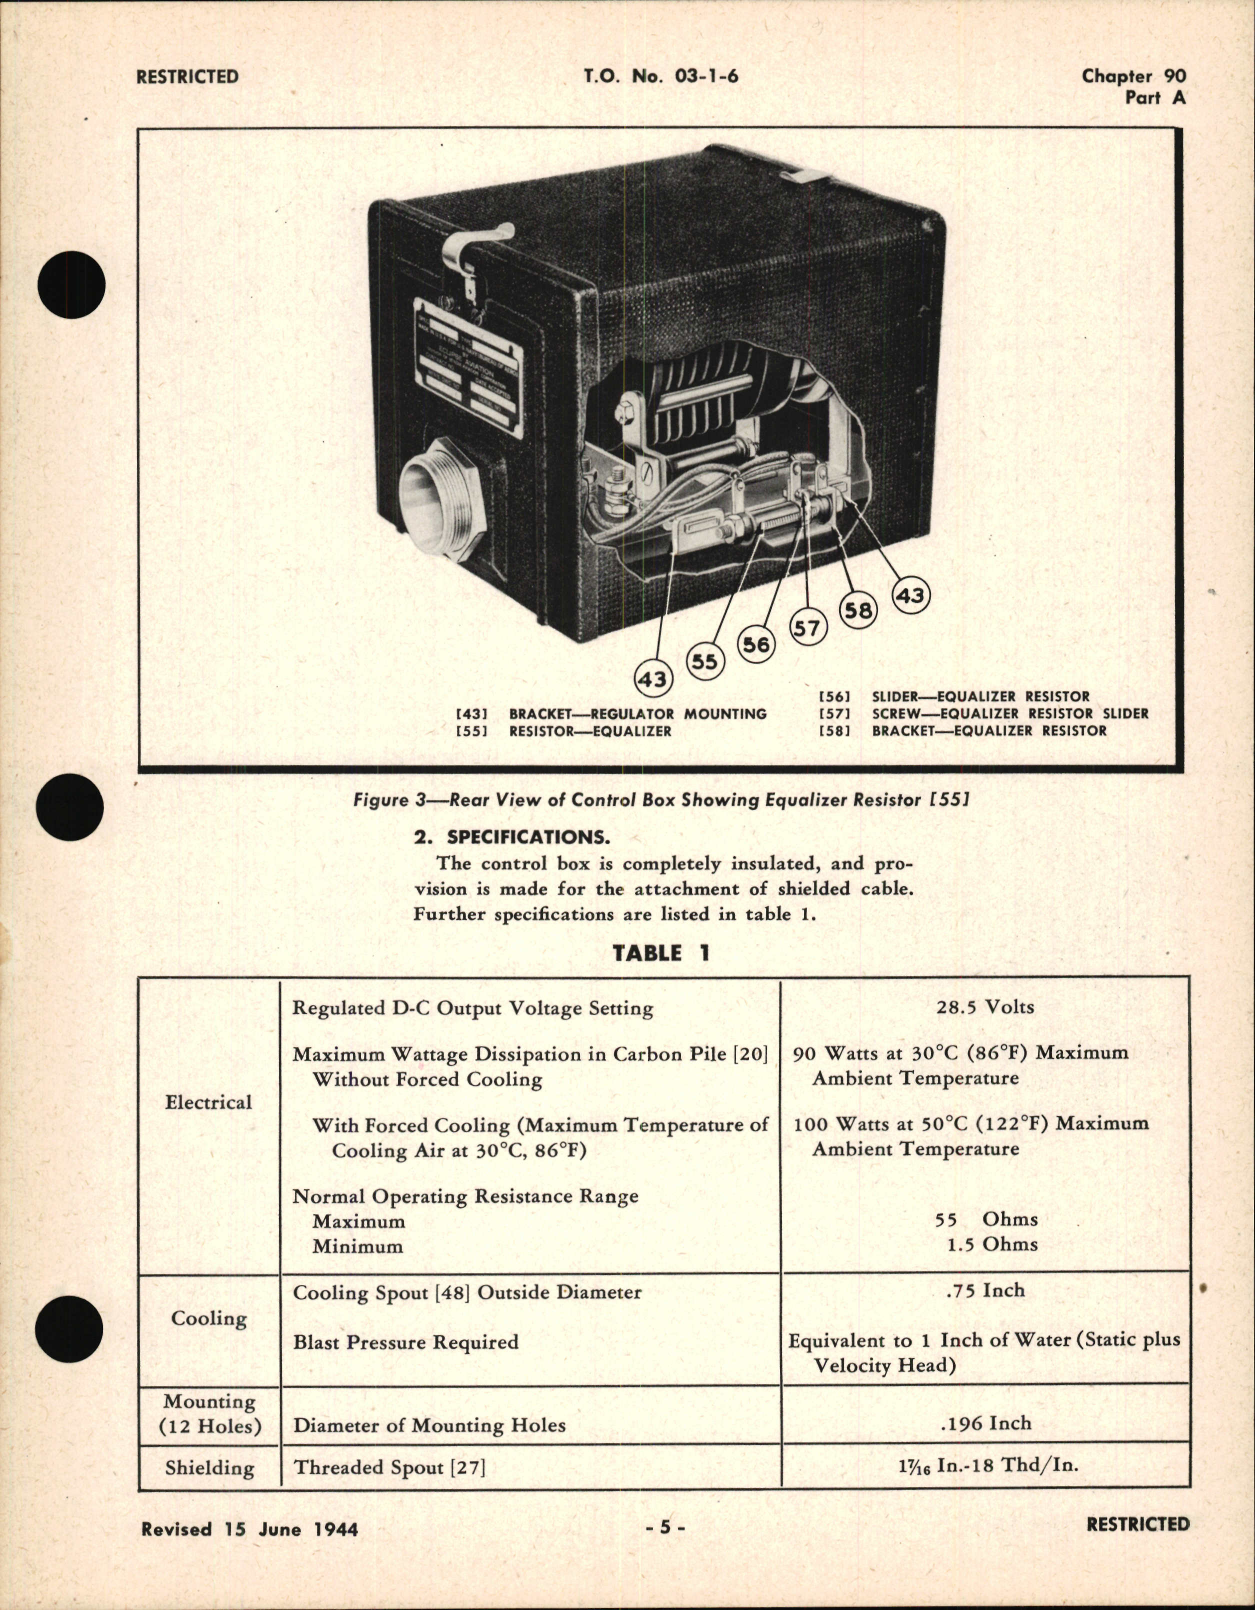 Sample page 5 from AirCorps Library document: Operating and Service Instructions for D-C Carbon Pile Voltage Regulator Control Box, Type 1305 Model 1, Ch 90 Part A